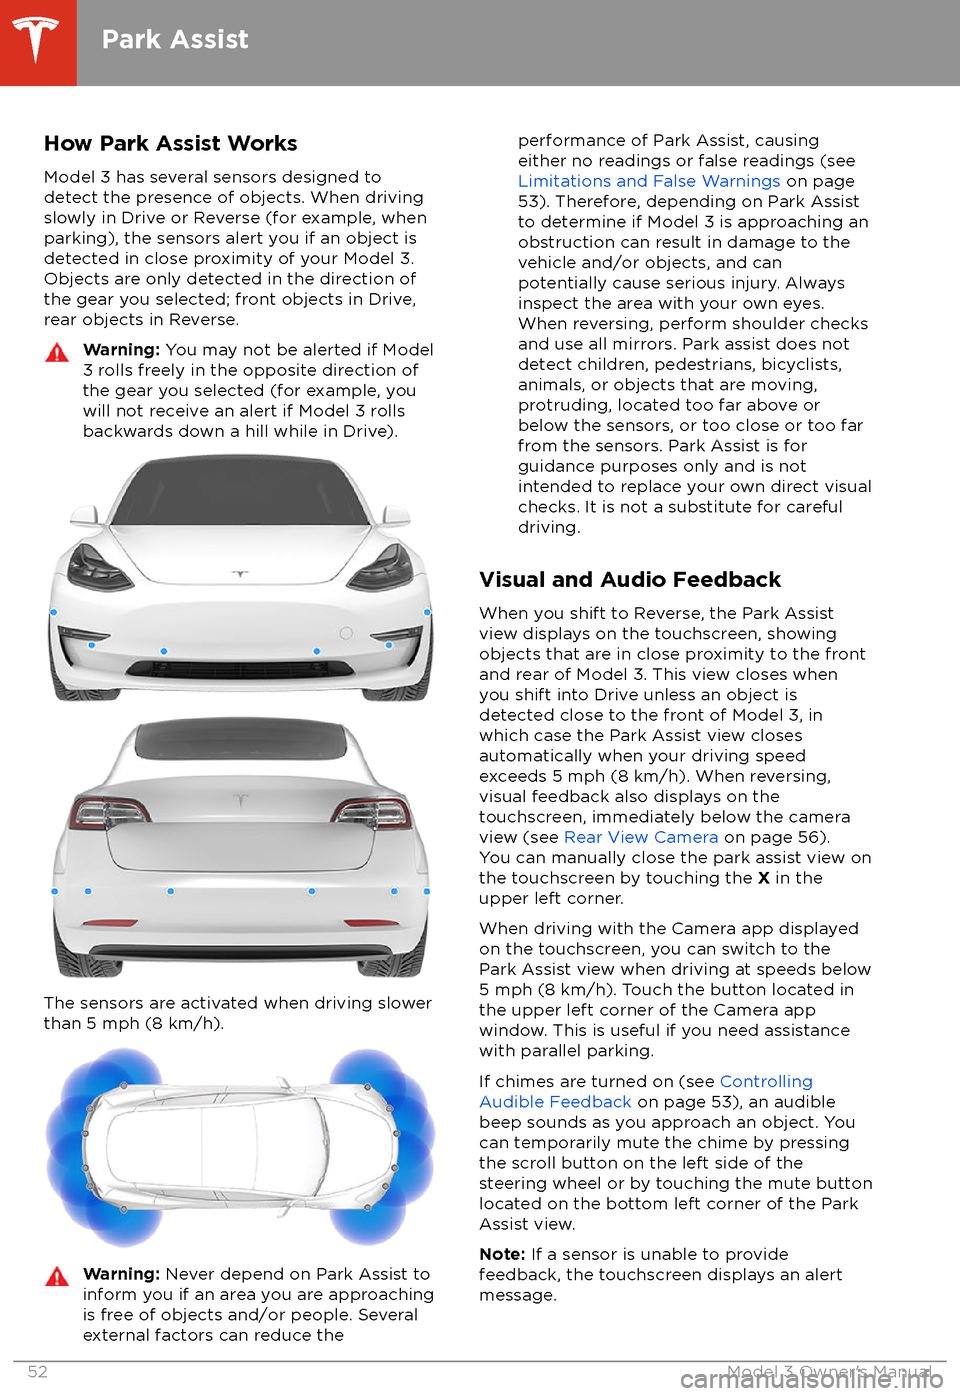 TESLA MODEL 3 2018  Owners Manual How Park Assist WorksModel 3 has several sensors designed to
detect the presence of objects. When driving slowly in Drive or Reverse (for example, when
parking), the sensors alert you if an object is
